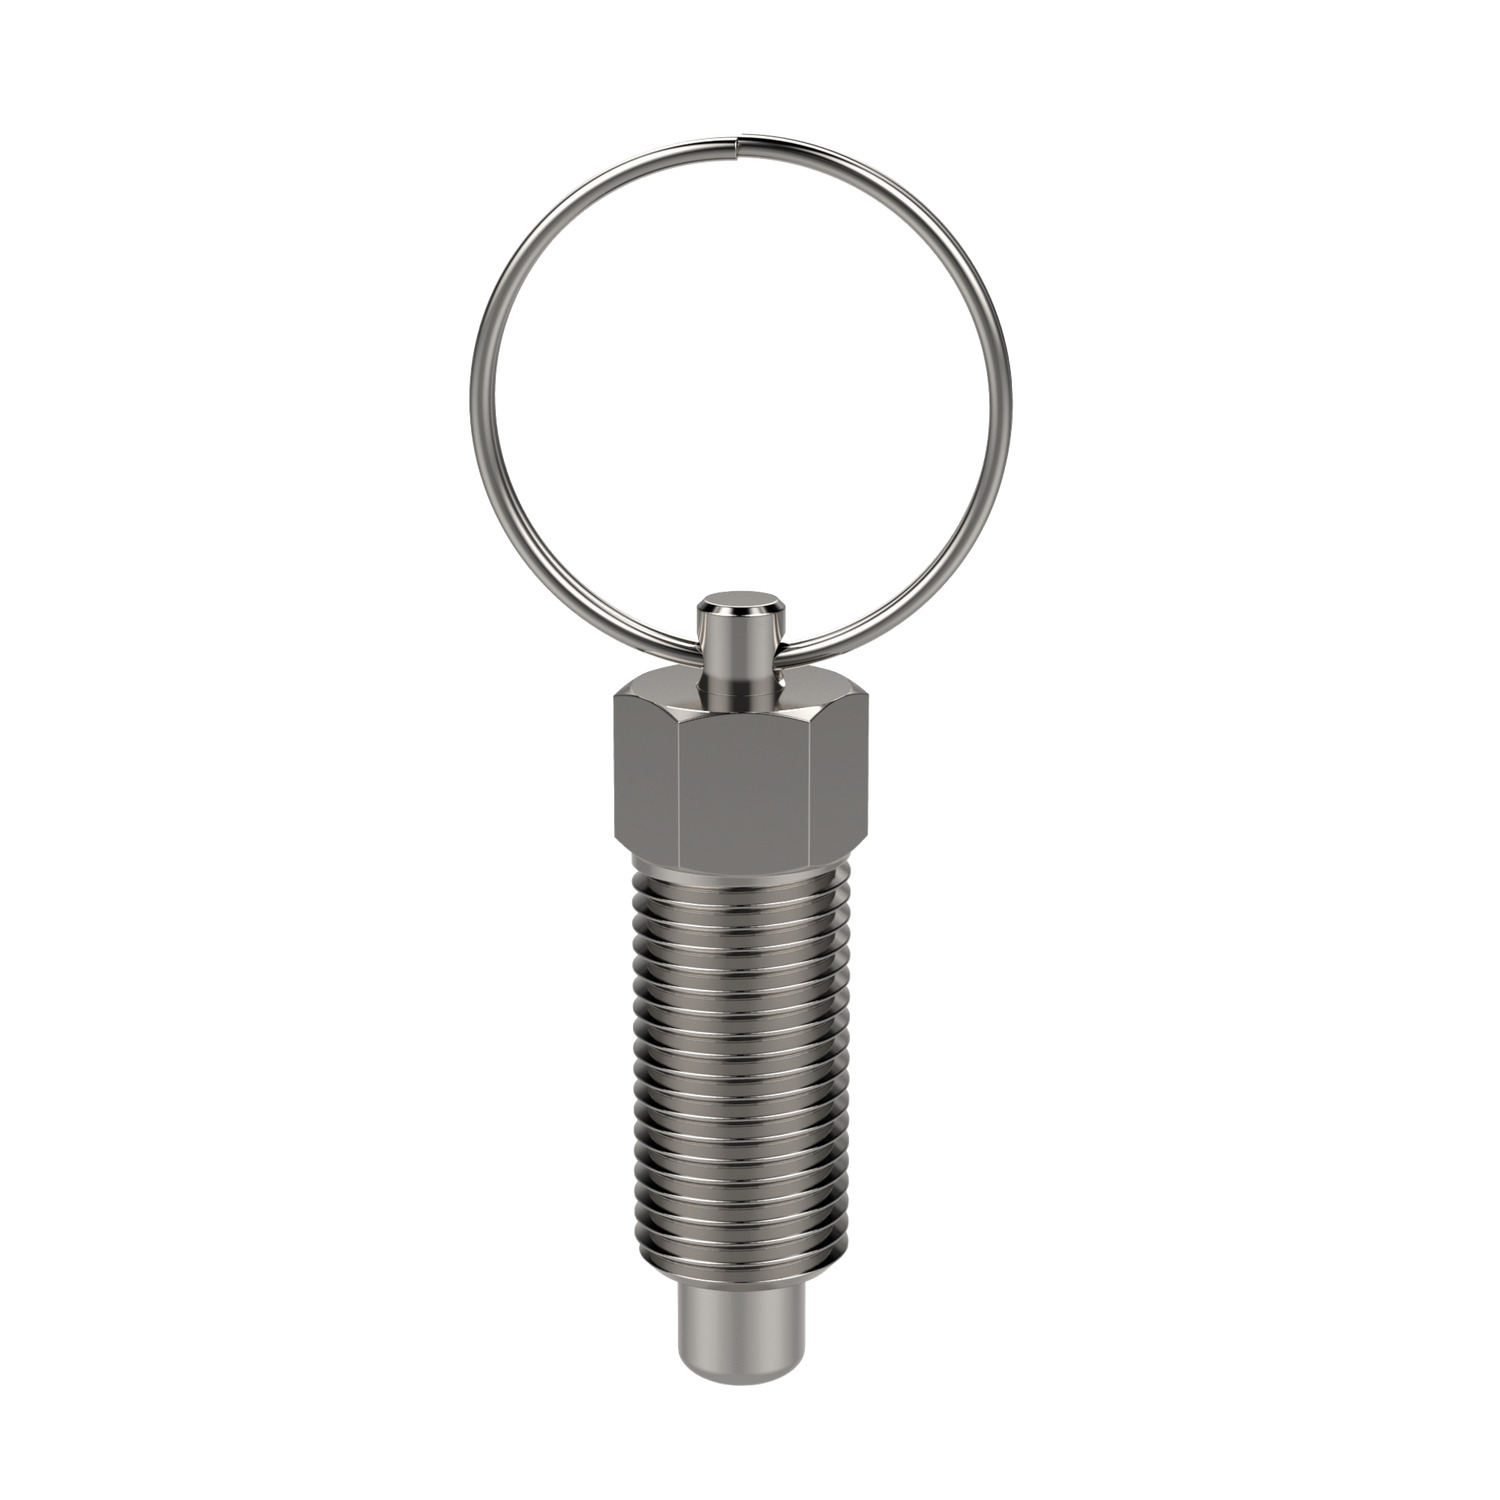 Index Plungers - Pull Ring Pull ring, non-locking index plungers with coarse thread. Made from stainless steel (AISI 303 and 301). Suitable for applications where high precision is not required (coarse thread).